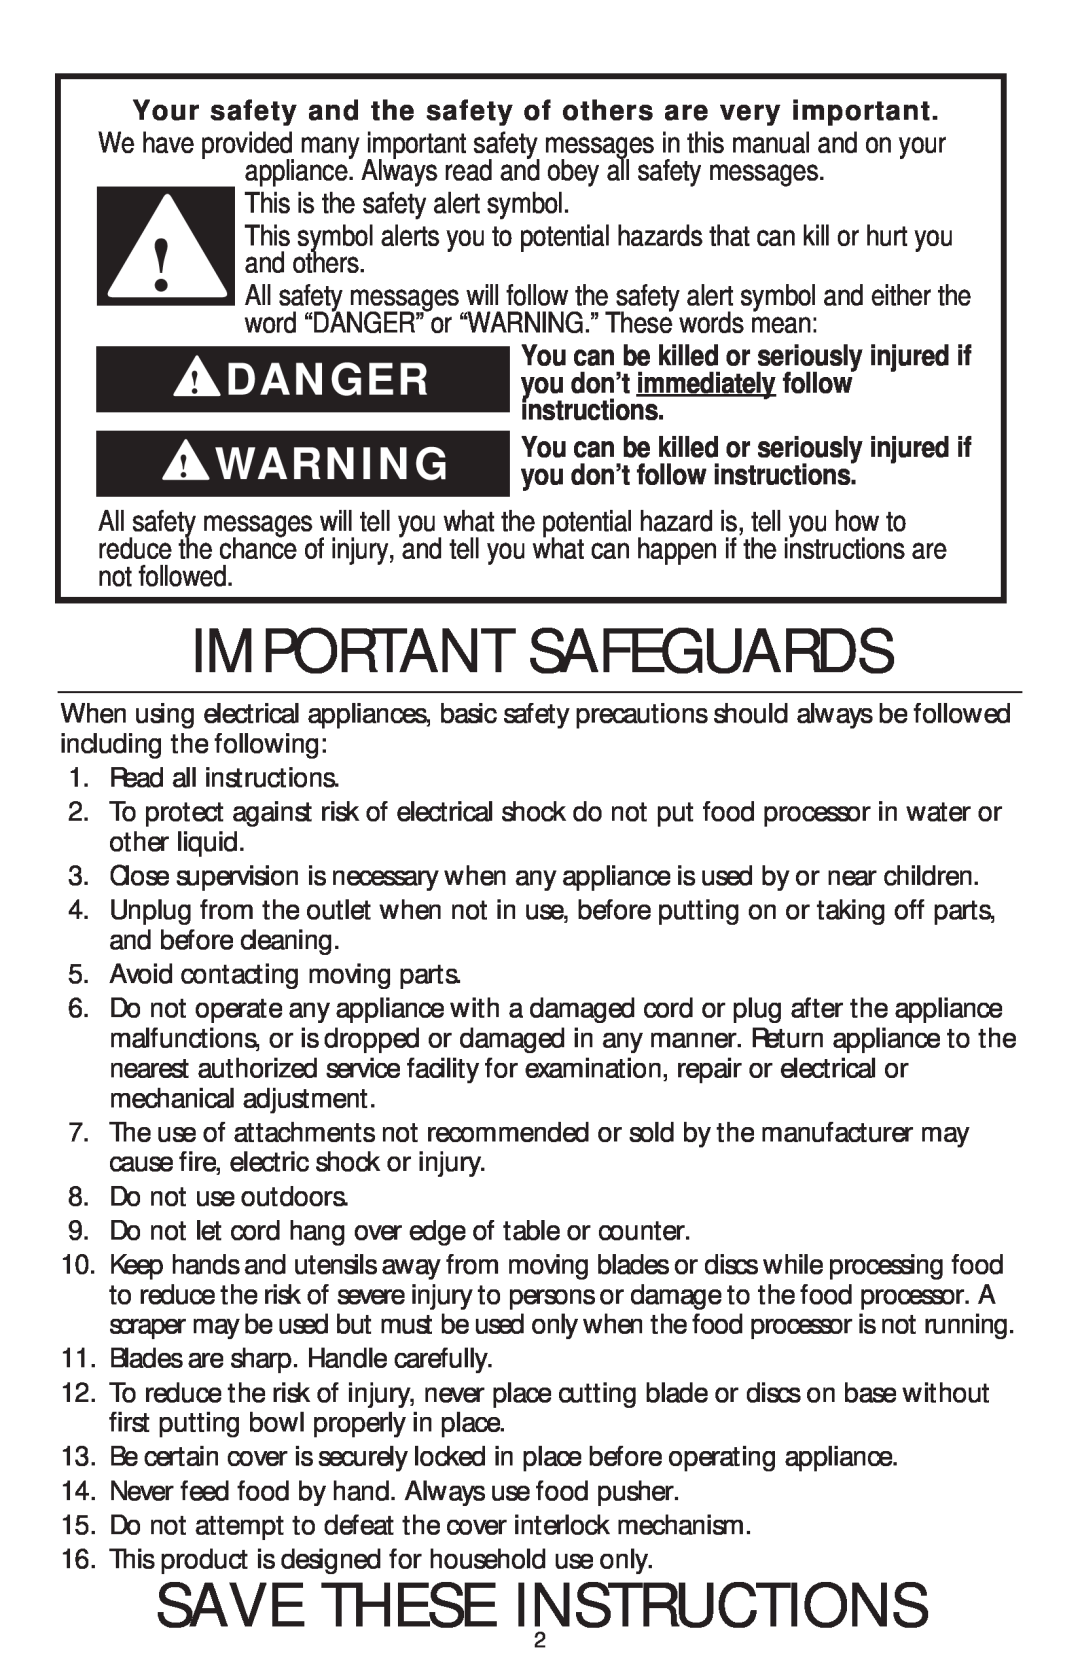 Kenmore KFPPS manual Your safety and the safety of others are very important, Important Safeguards, Save These Instructions 